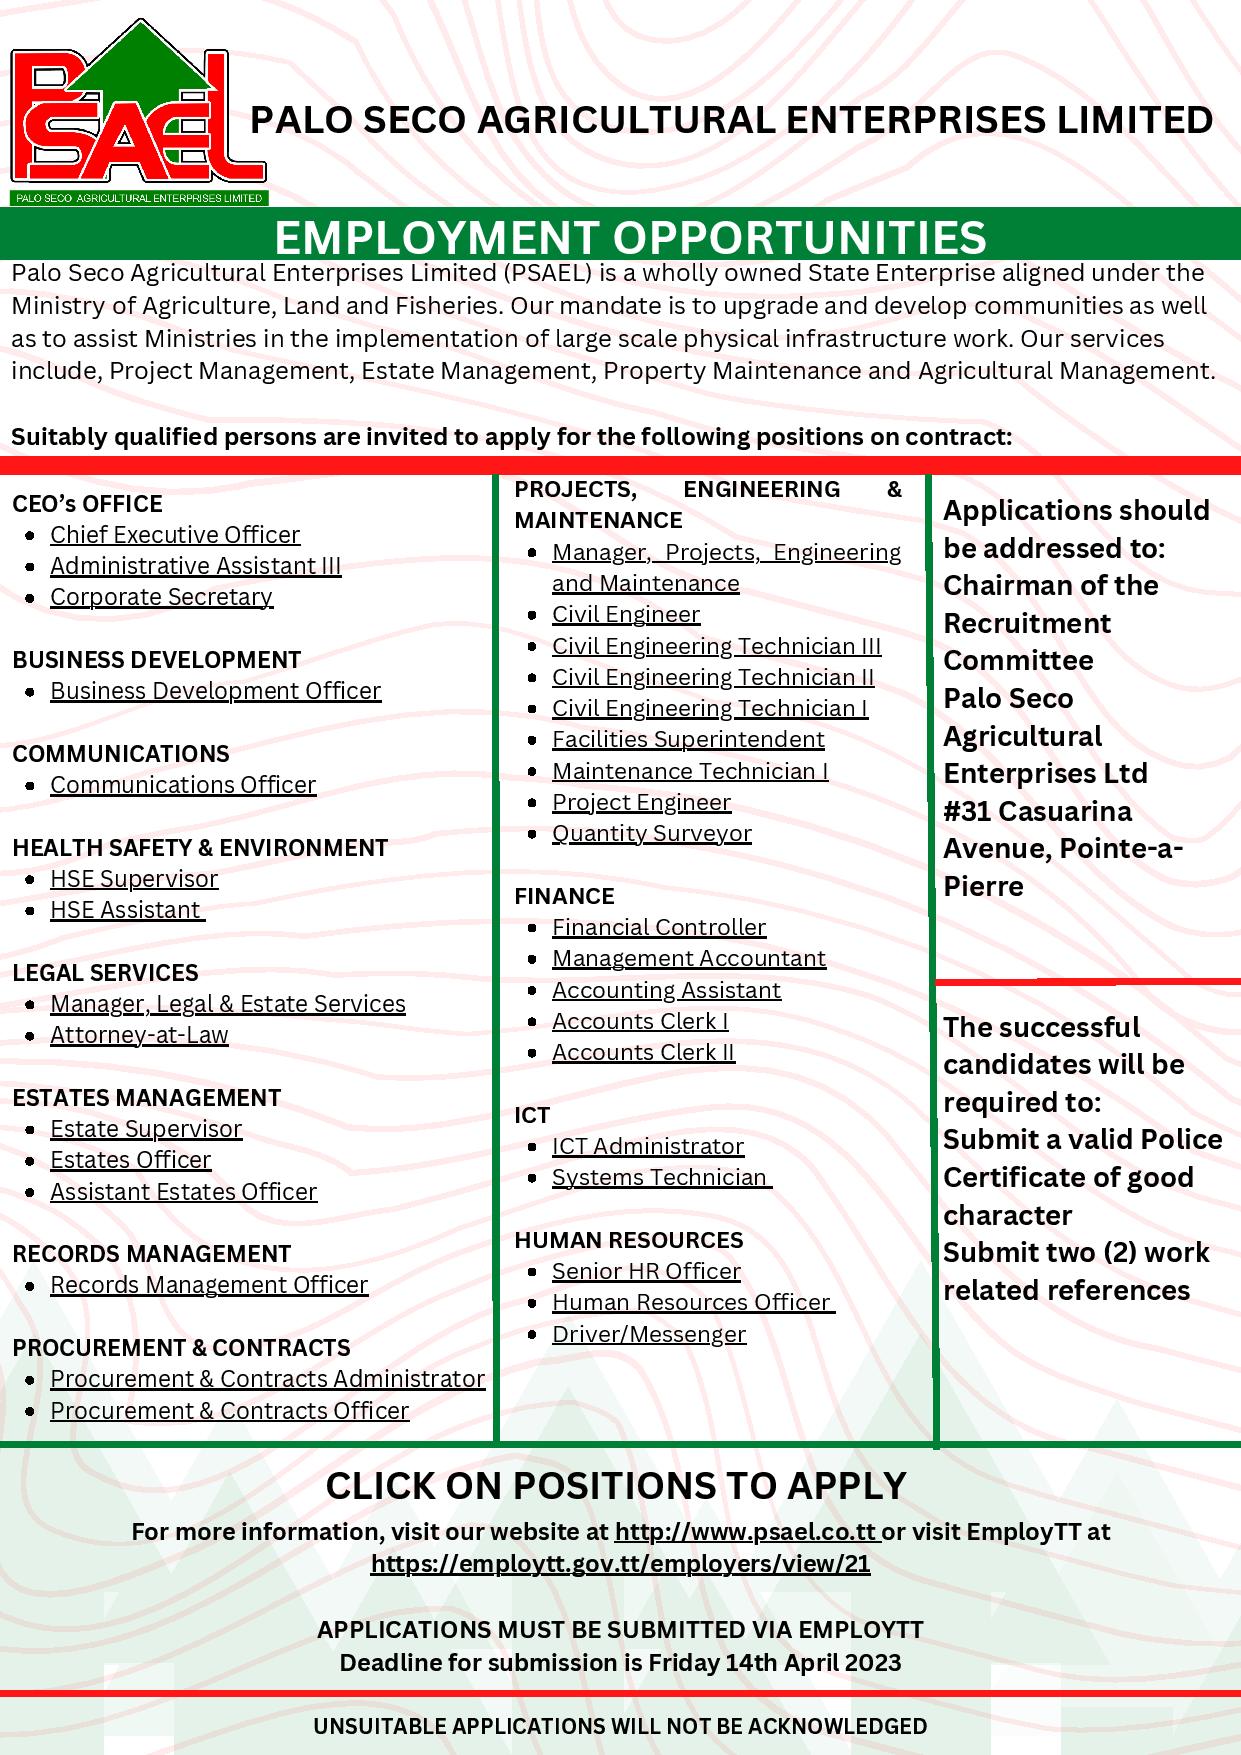 Ministry of Agriculture Land and Fisheries Vacancies